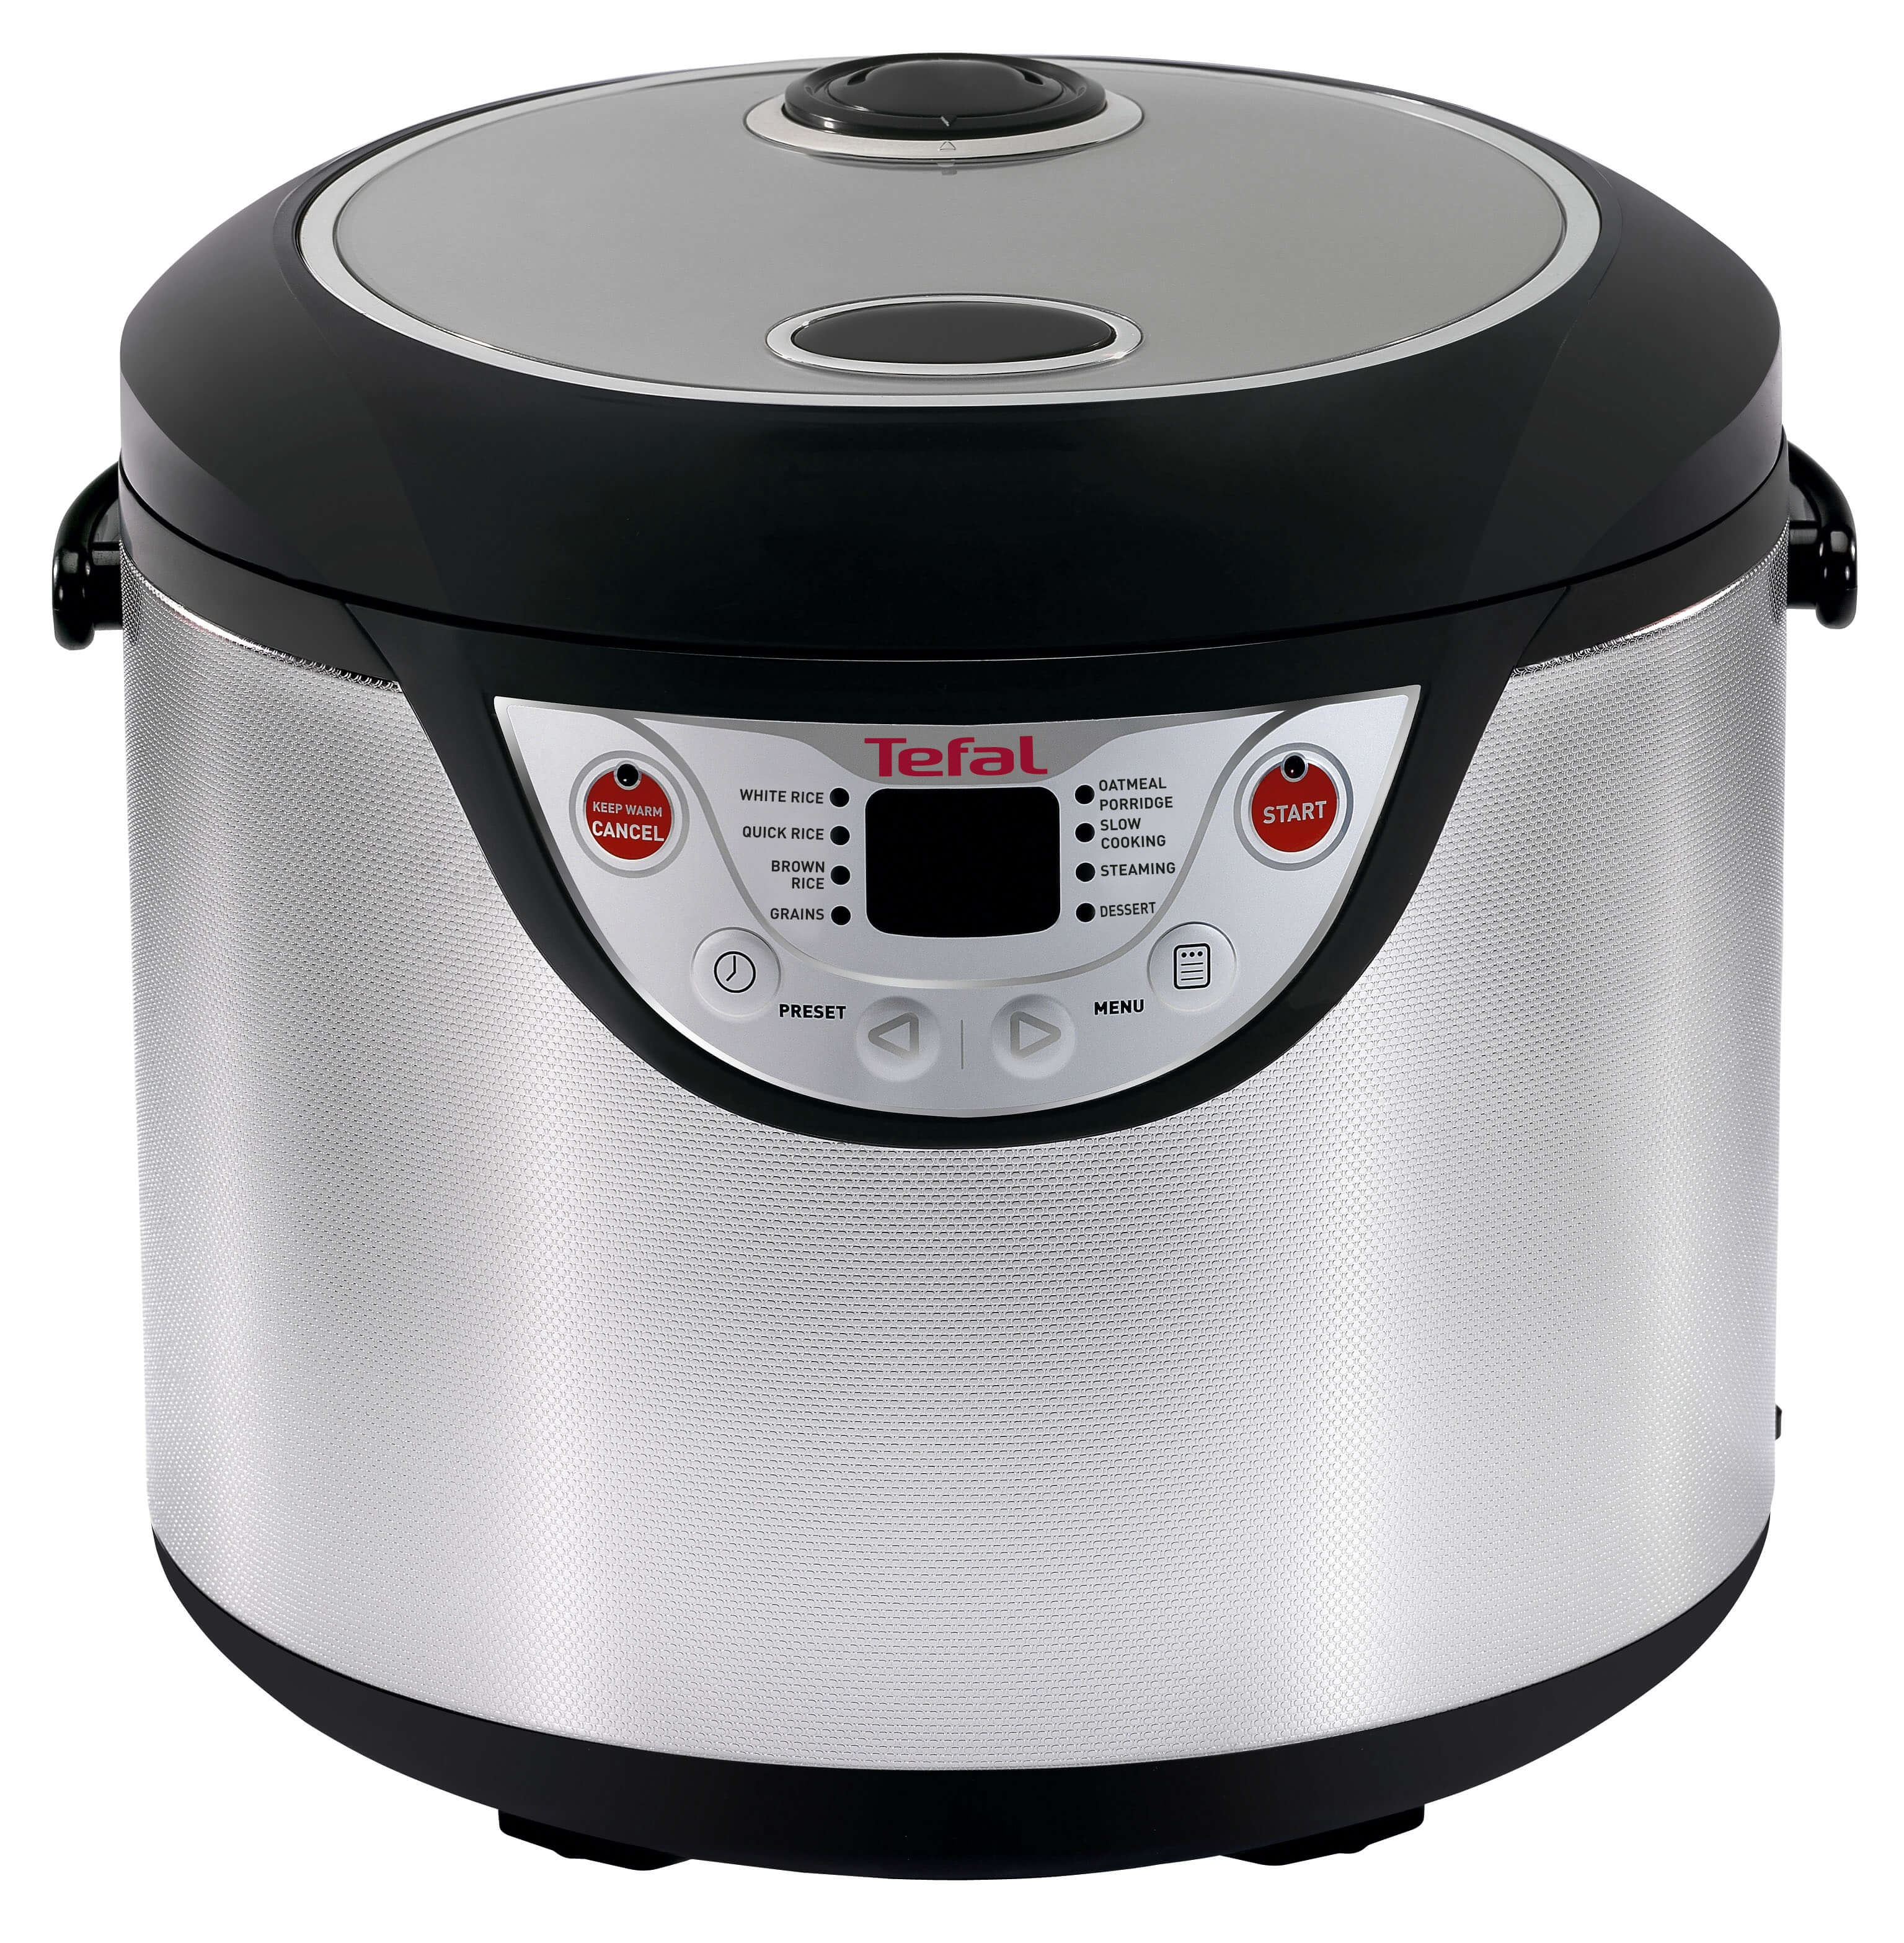 Tefal 8 in 1 Multi Cooker – Review